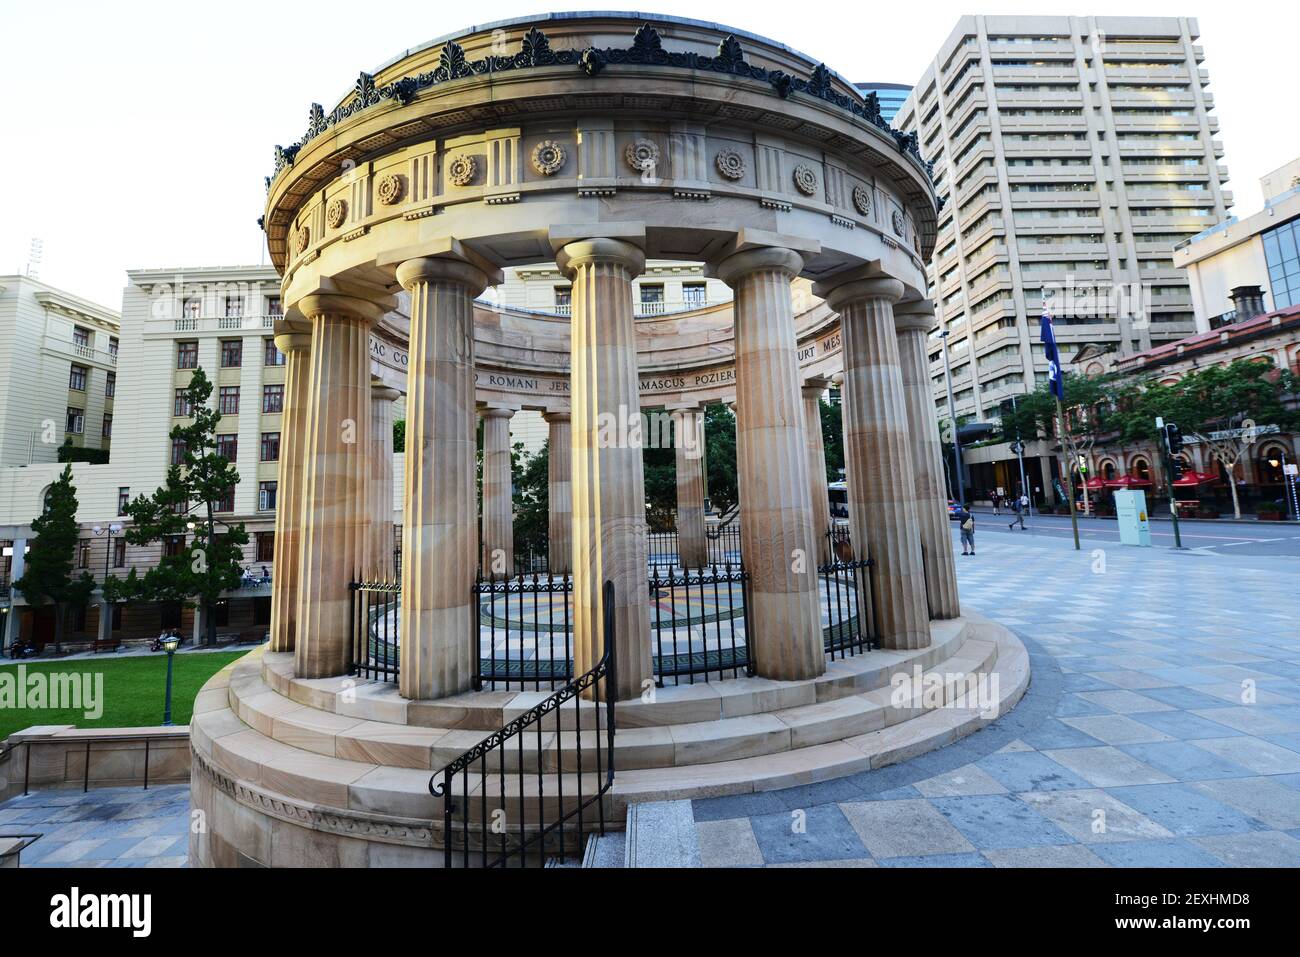 The Shrine of Remembrance is located in ANZAC Square, between Ann Street and Adelaide Street, in Brisbane, Queensland, Australia. Stock Photo